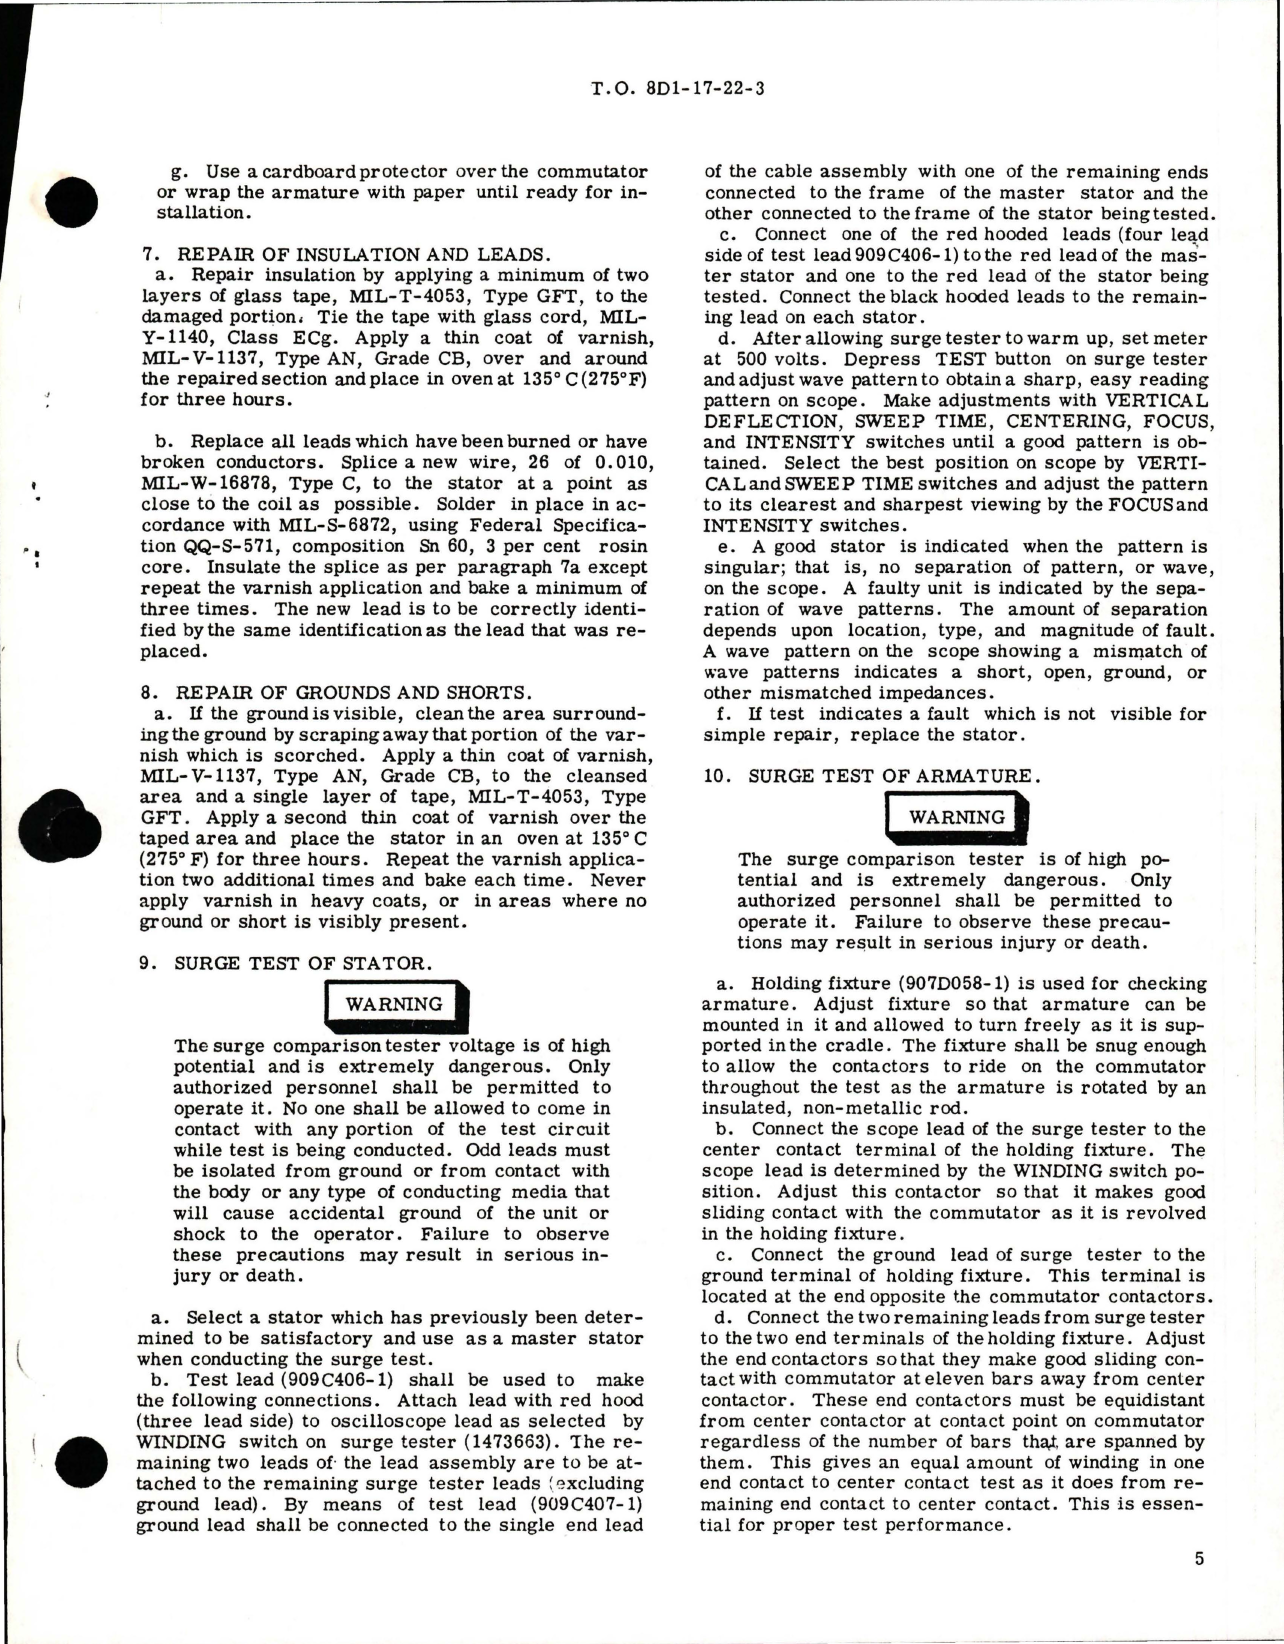 Sample page 5 from AirCorps Library document: Overhaul Instructions with Parts Breakdown for DC Motor - Part A35A9063